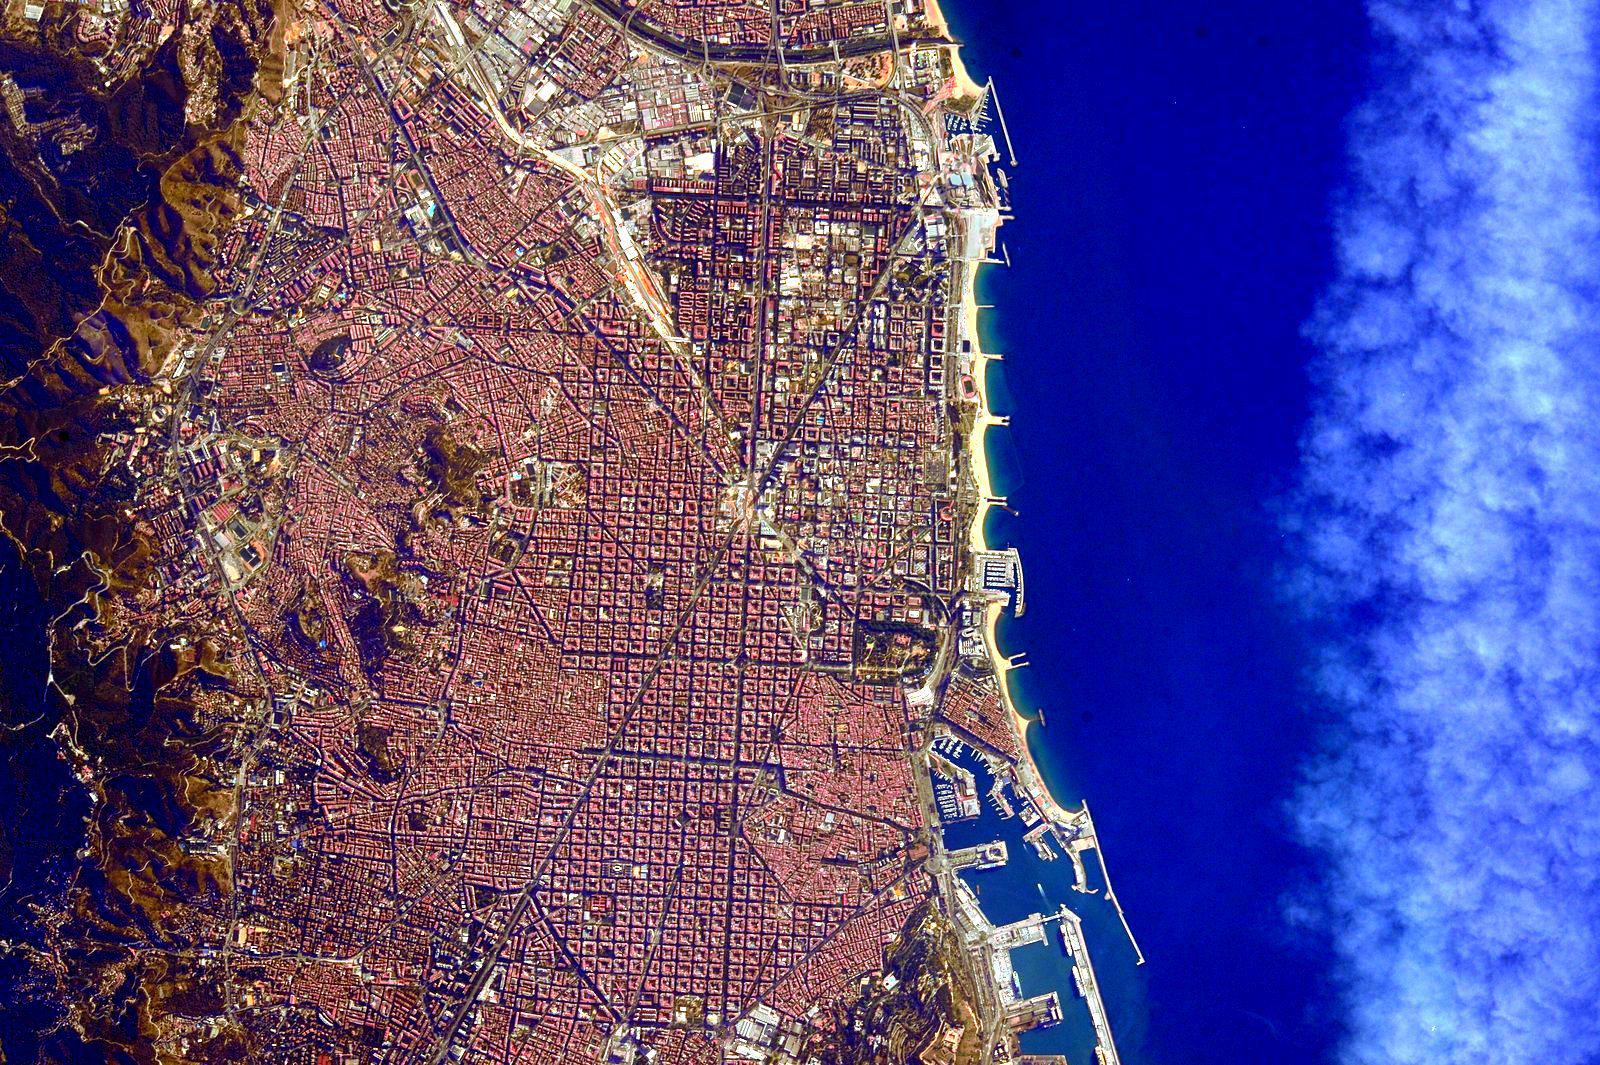 Barcelona from space